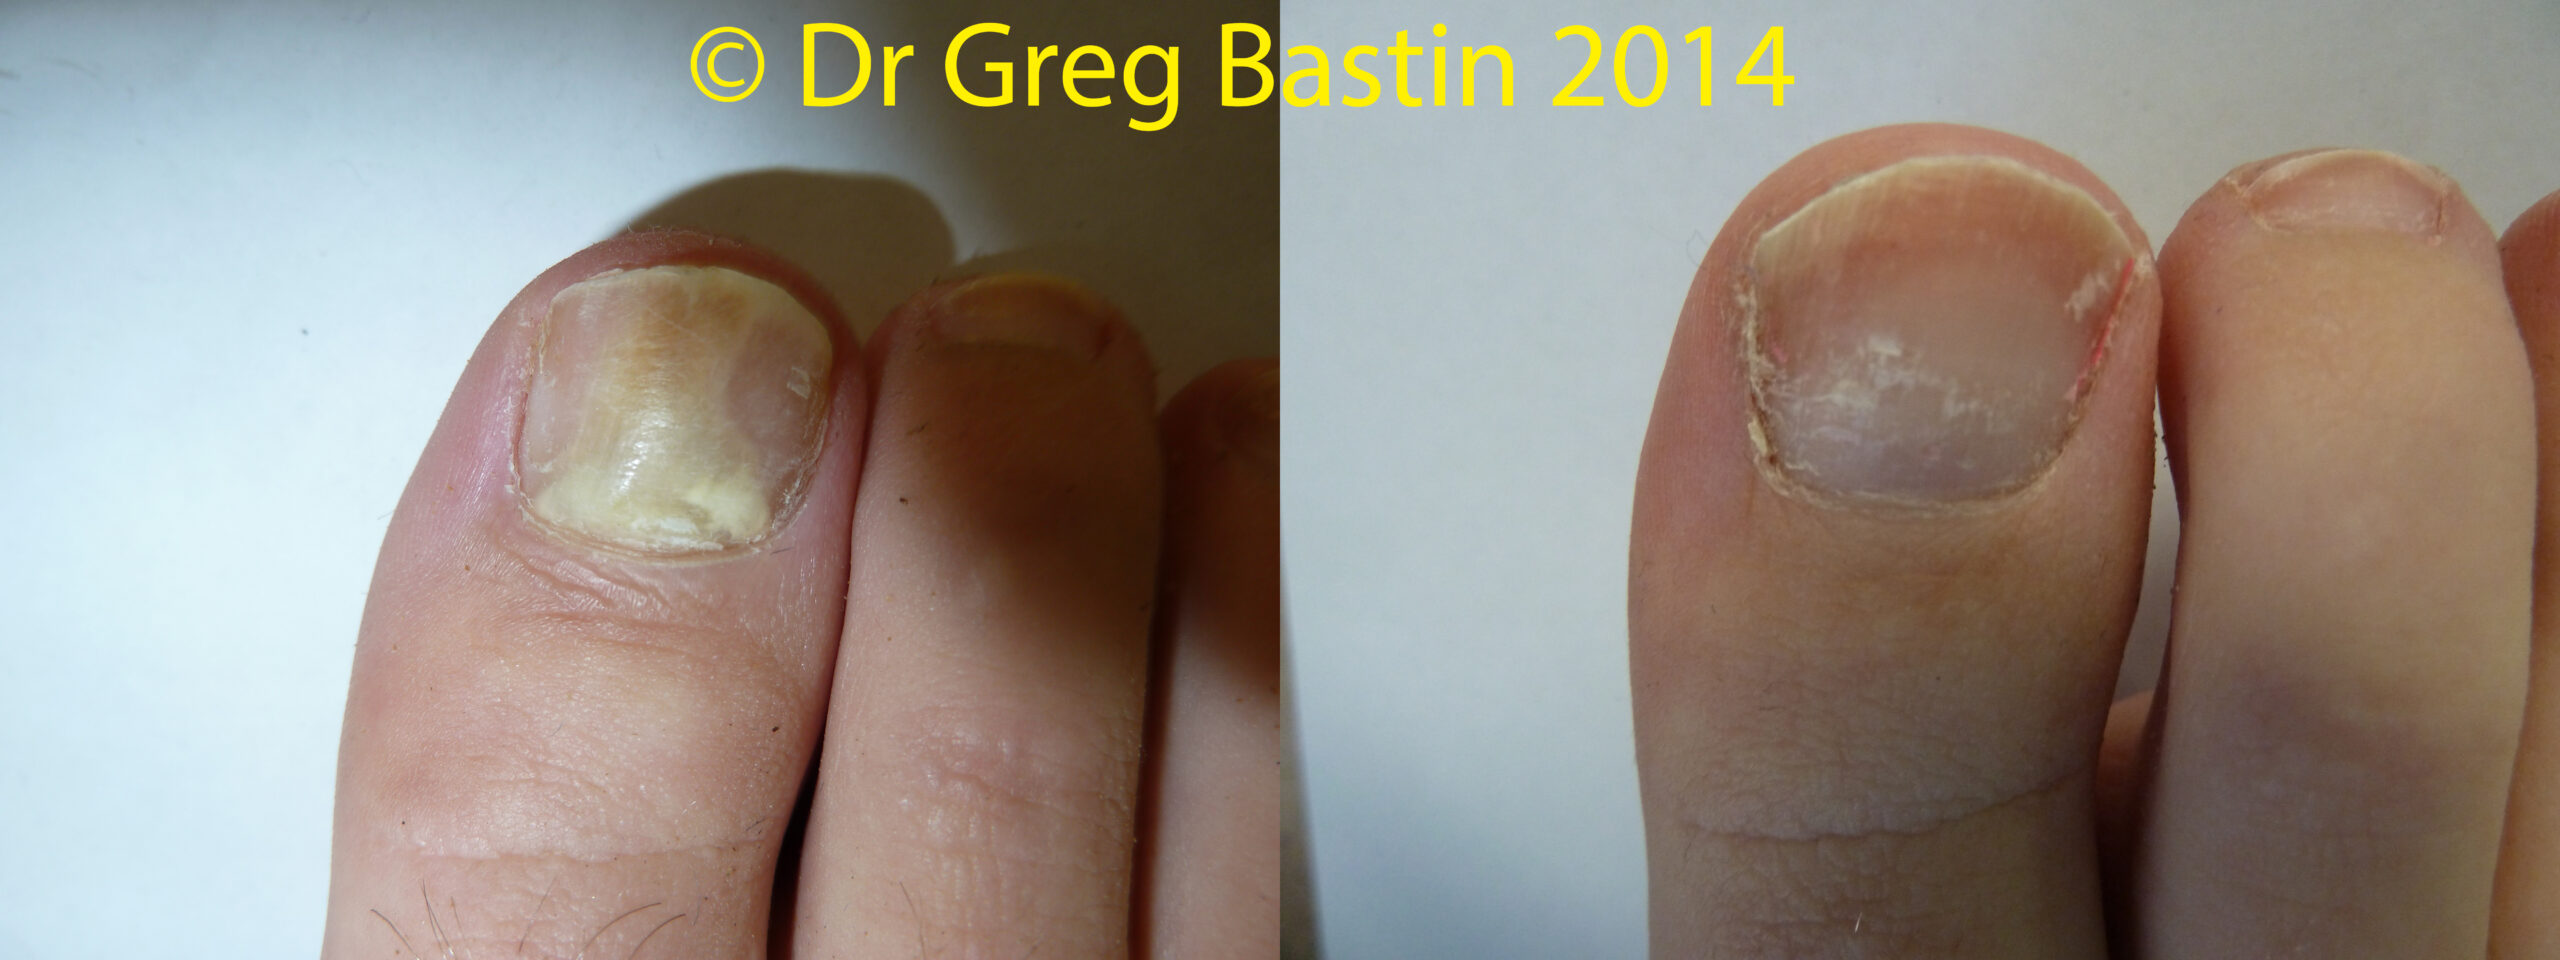 Treatment for Fungal Nails